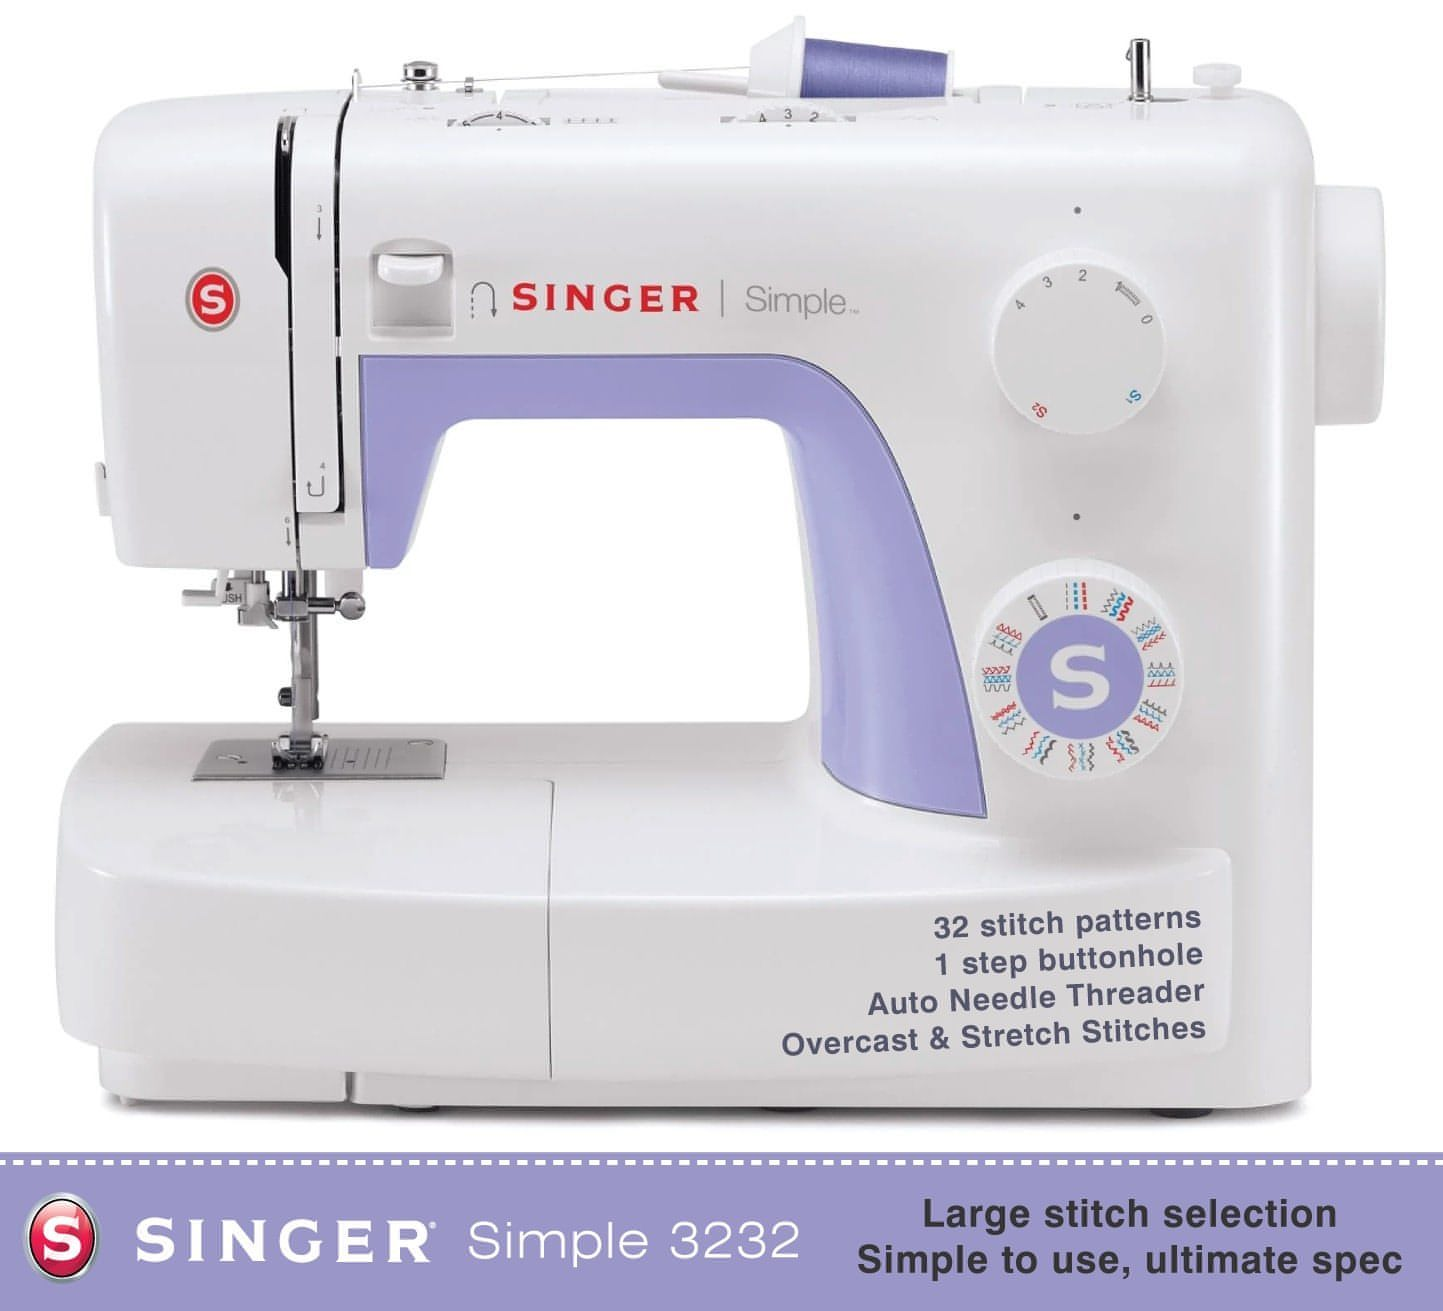 Singer Simple 3232 Sewing Machine - High spec 32 stitch patterns - Free upgrade to latest design on this offer